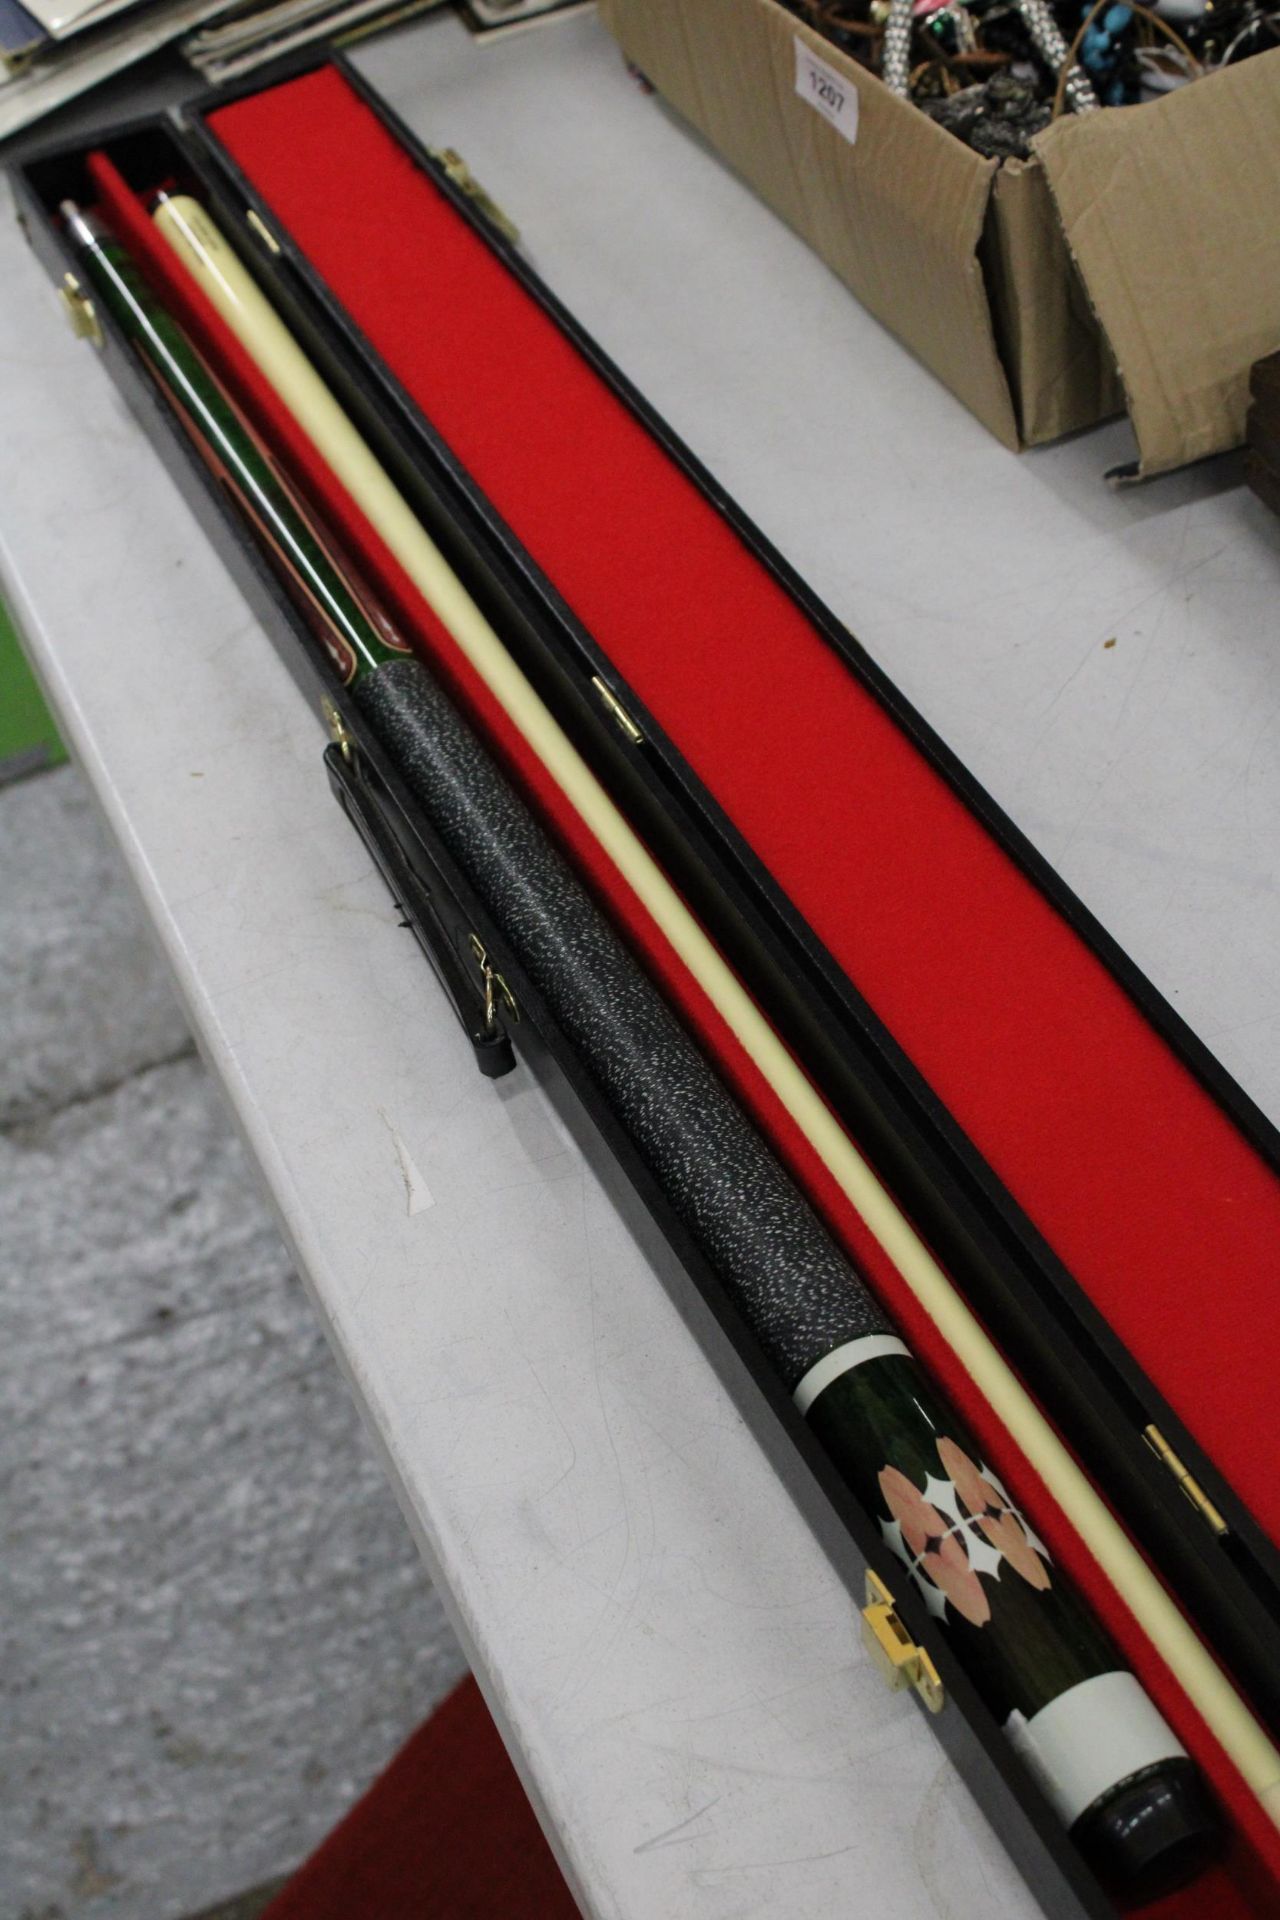 A DECORATIVE POOL CUE IN A HARD CASE - Image 5 of 5